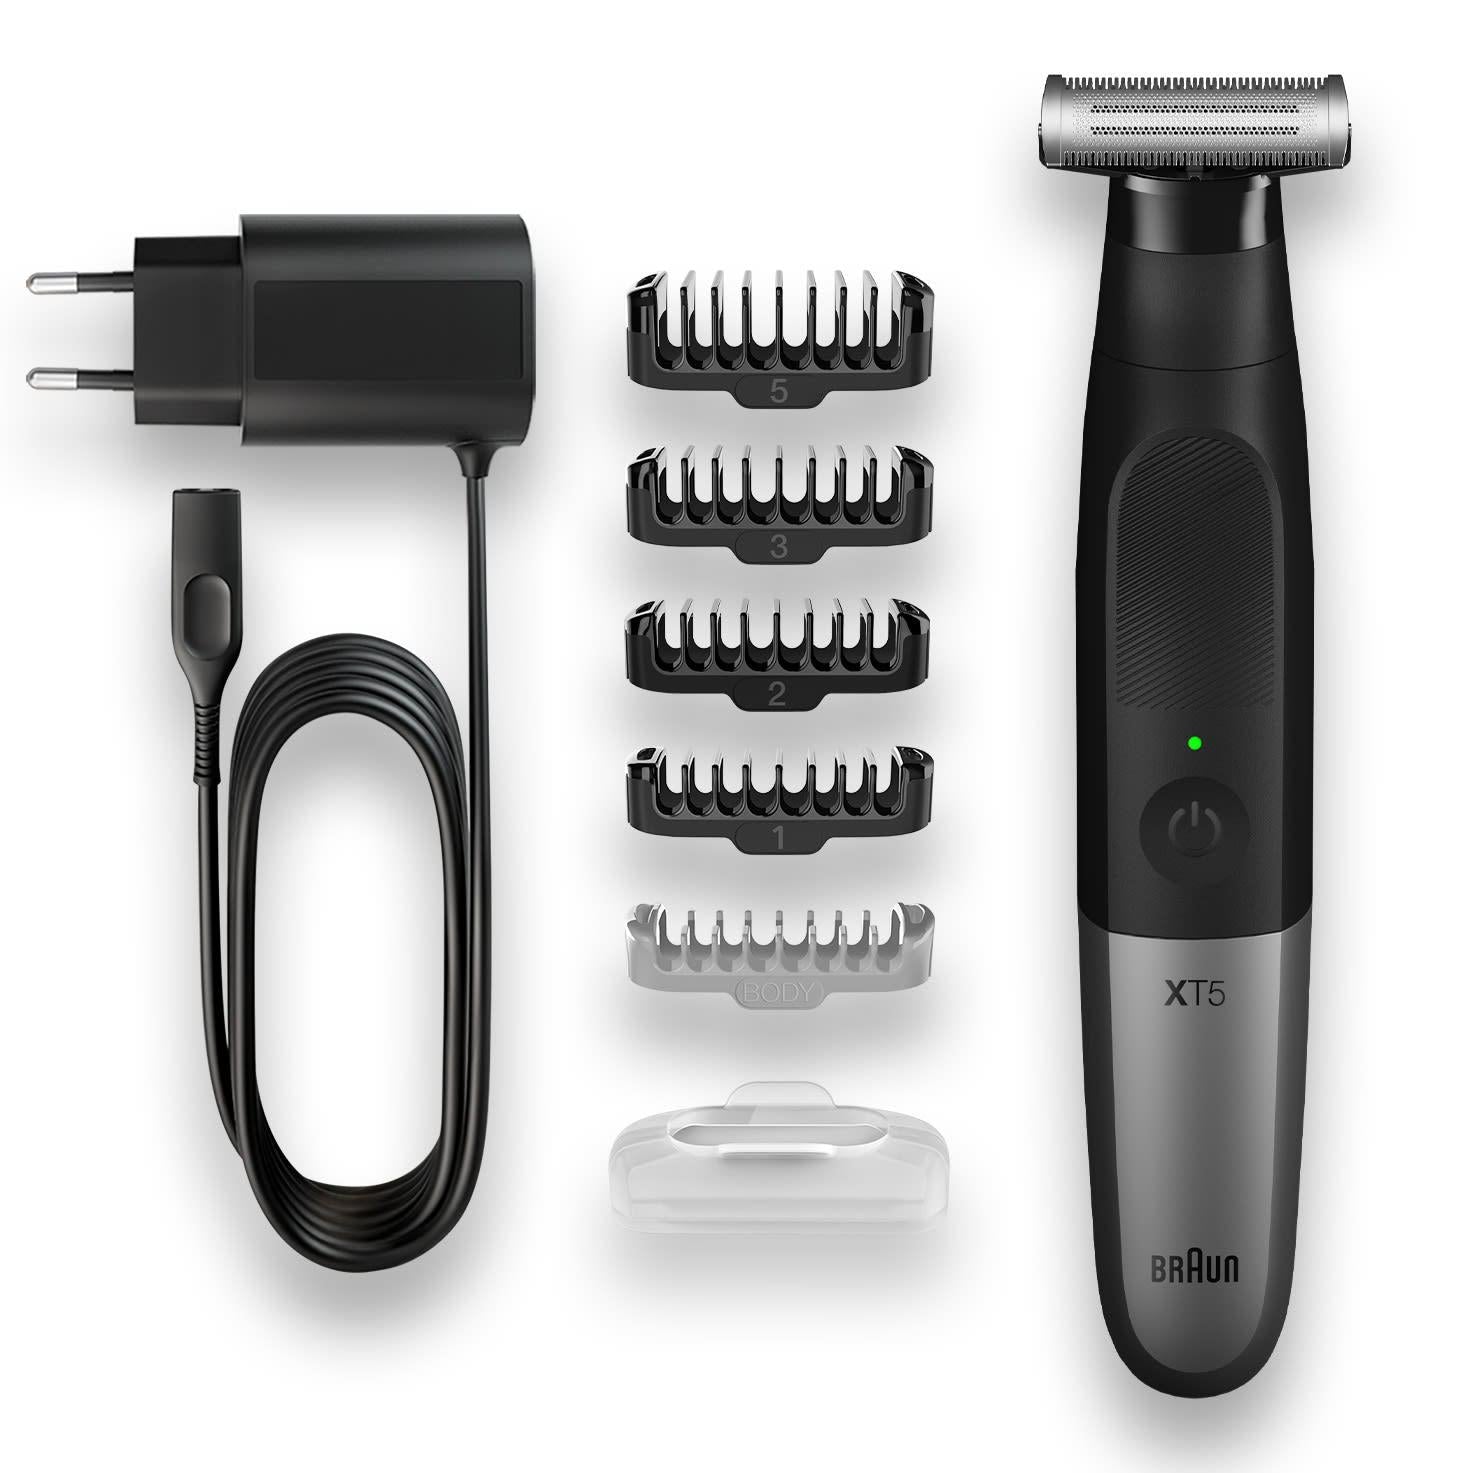 Braun Series X XT5100 Wet & Dry all-in-one tool with 5 attachments, black / silver - Healthxpress.ie